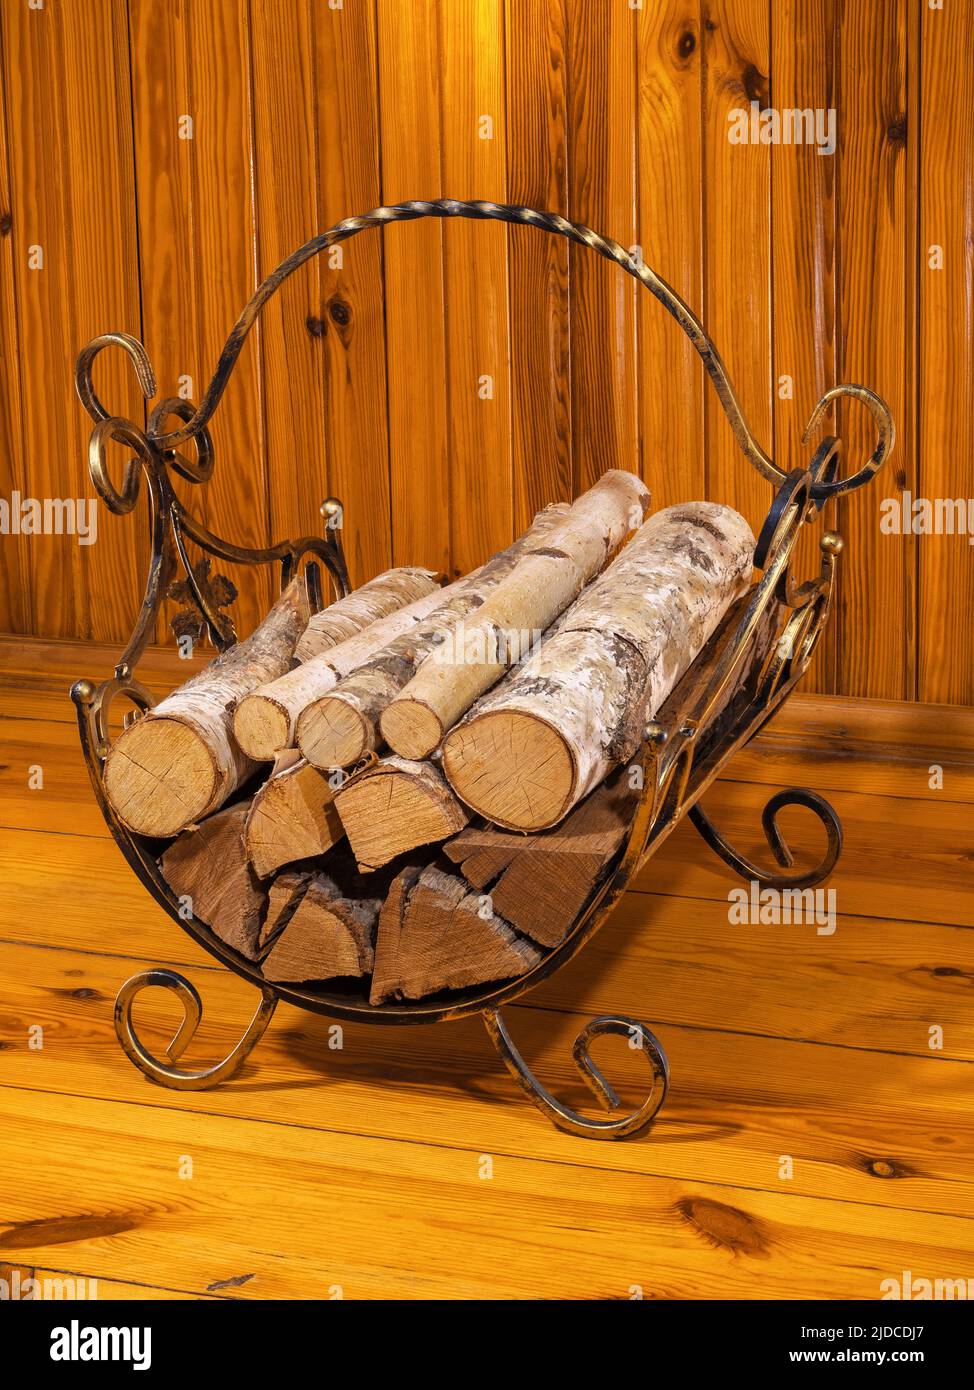 Firewood stack in brass basket by a wooden wall Stock Photo